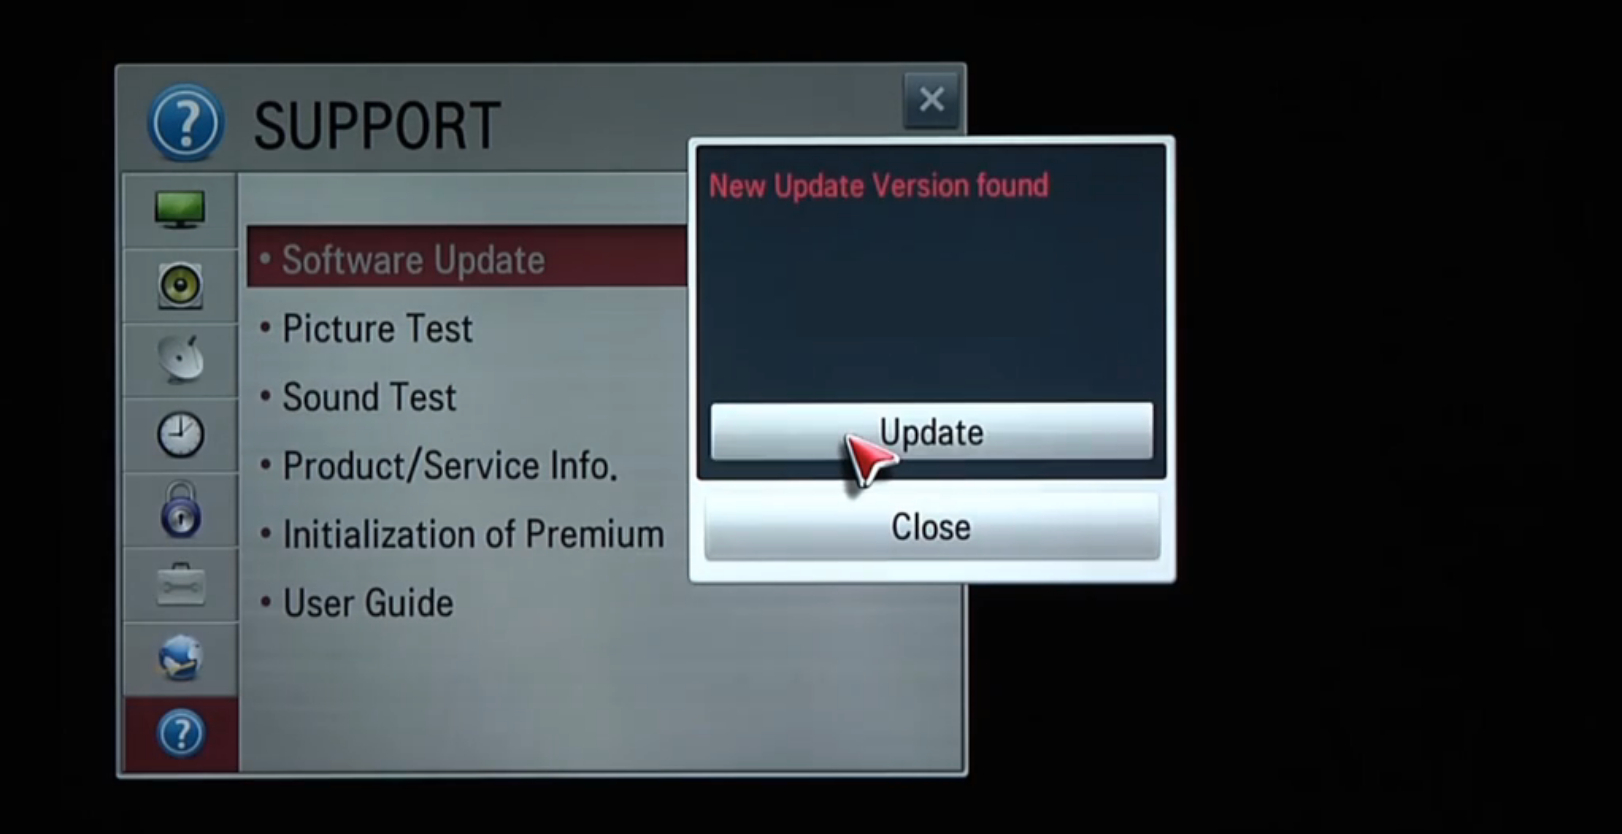 Select Update to webOS.